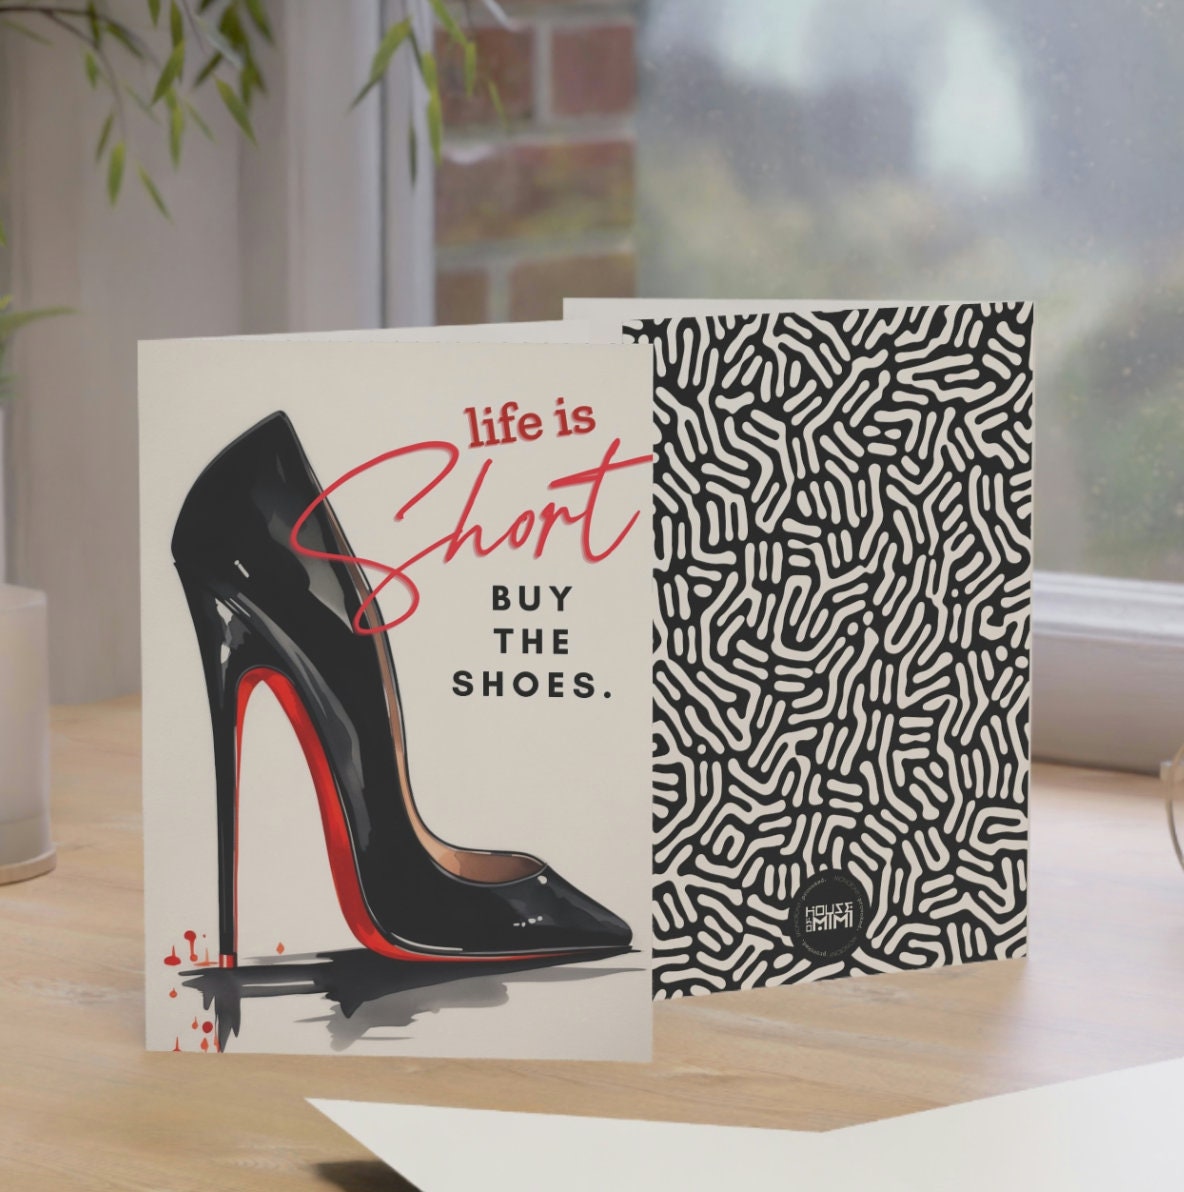 Red Bottom Heels Louboutin Classic Black Pumps Poster